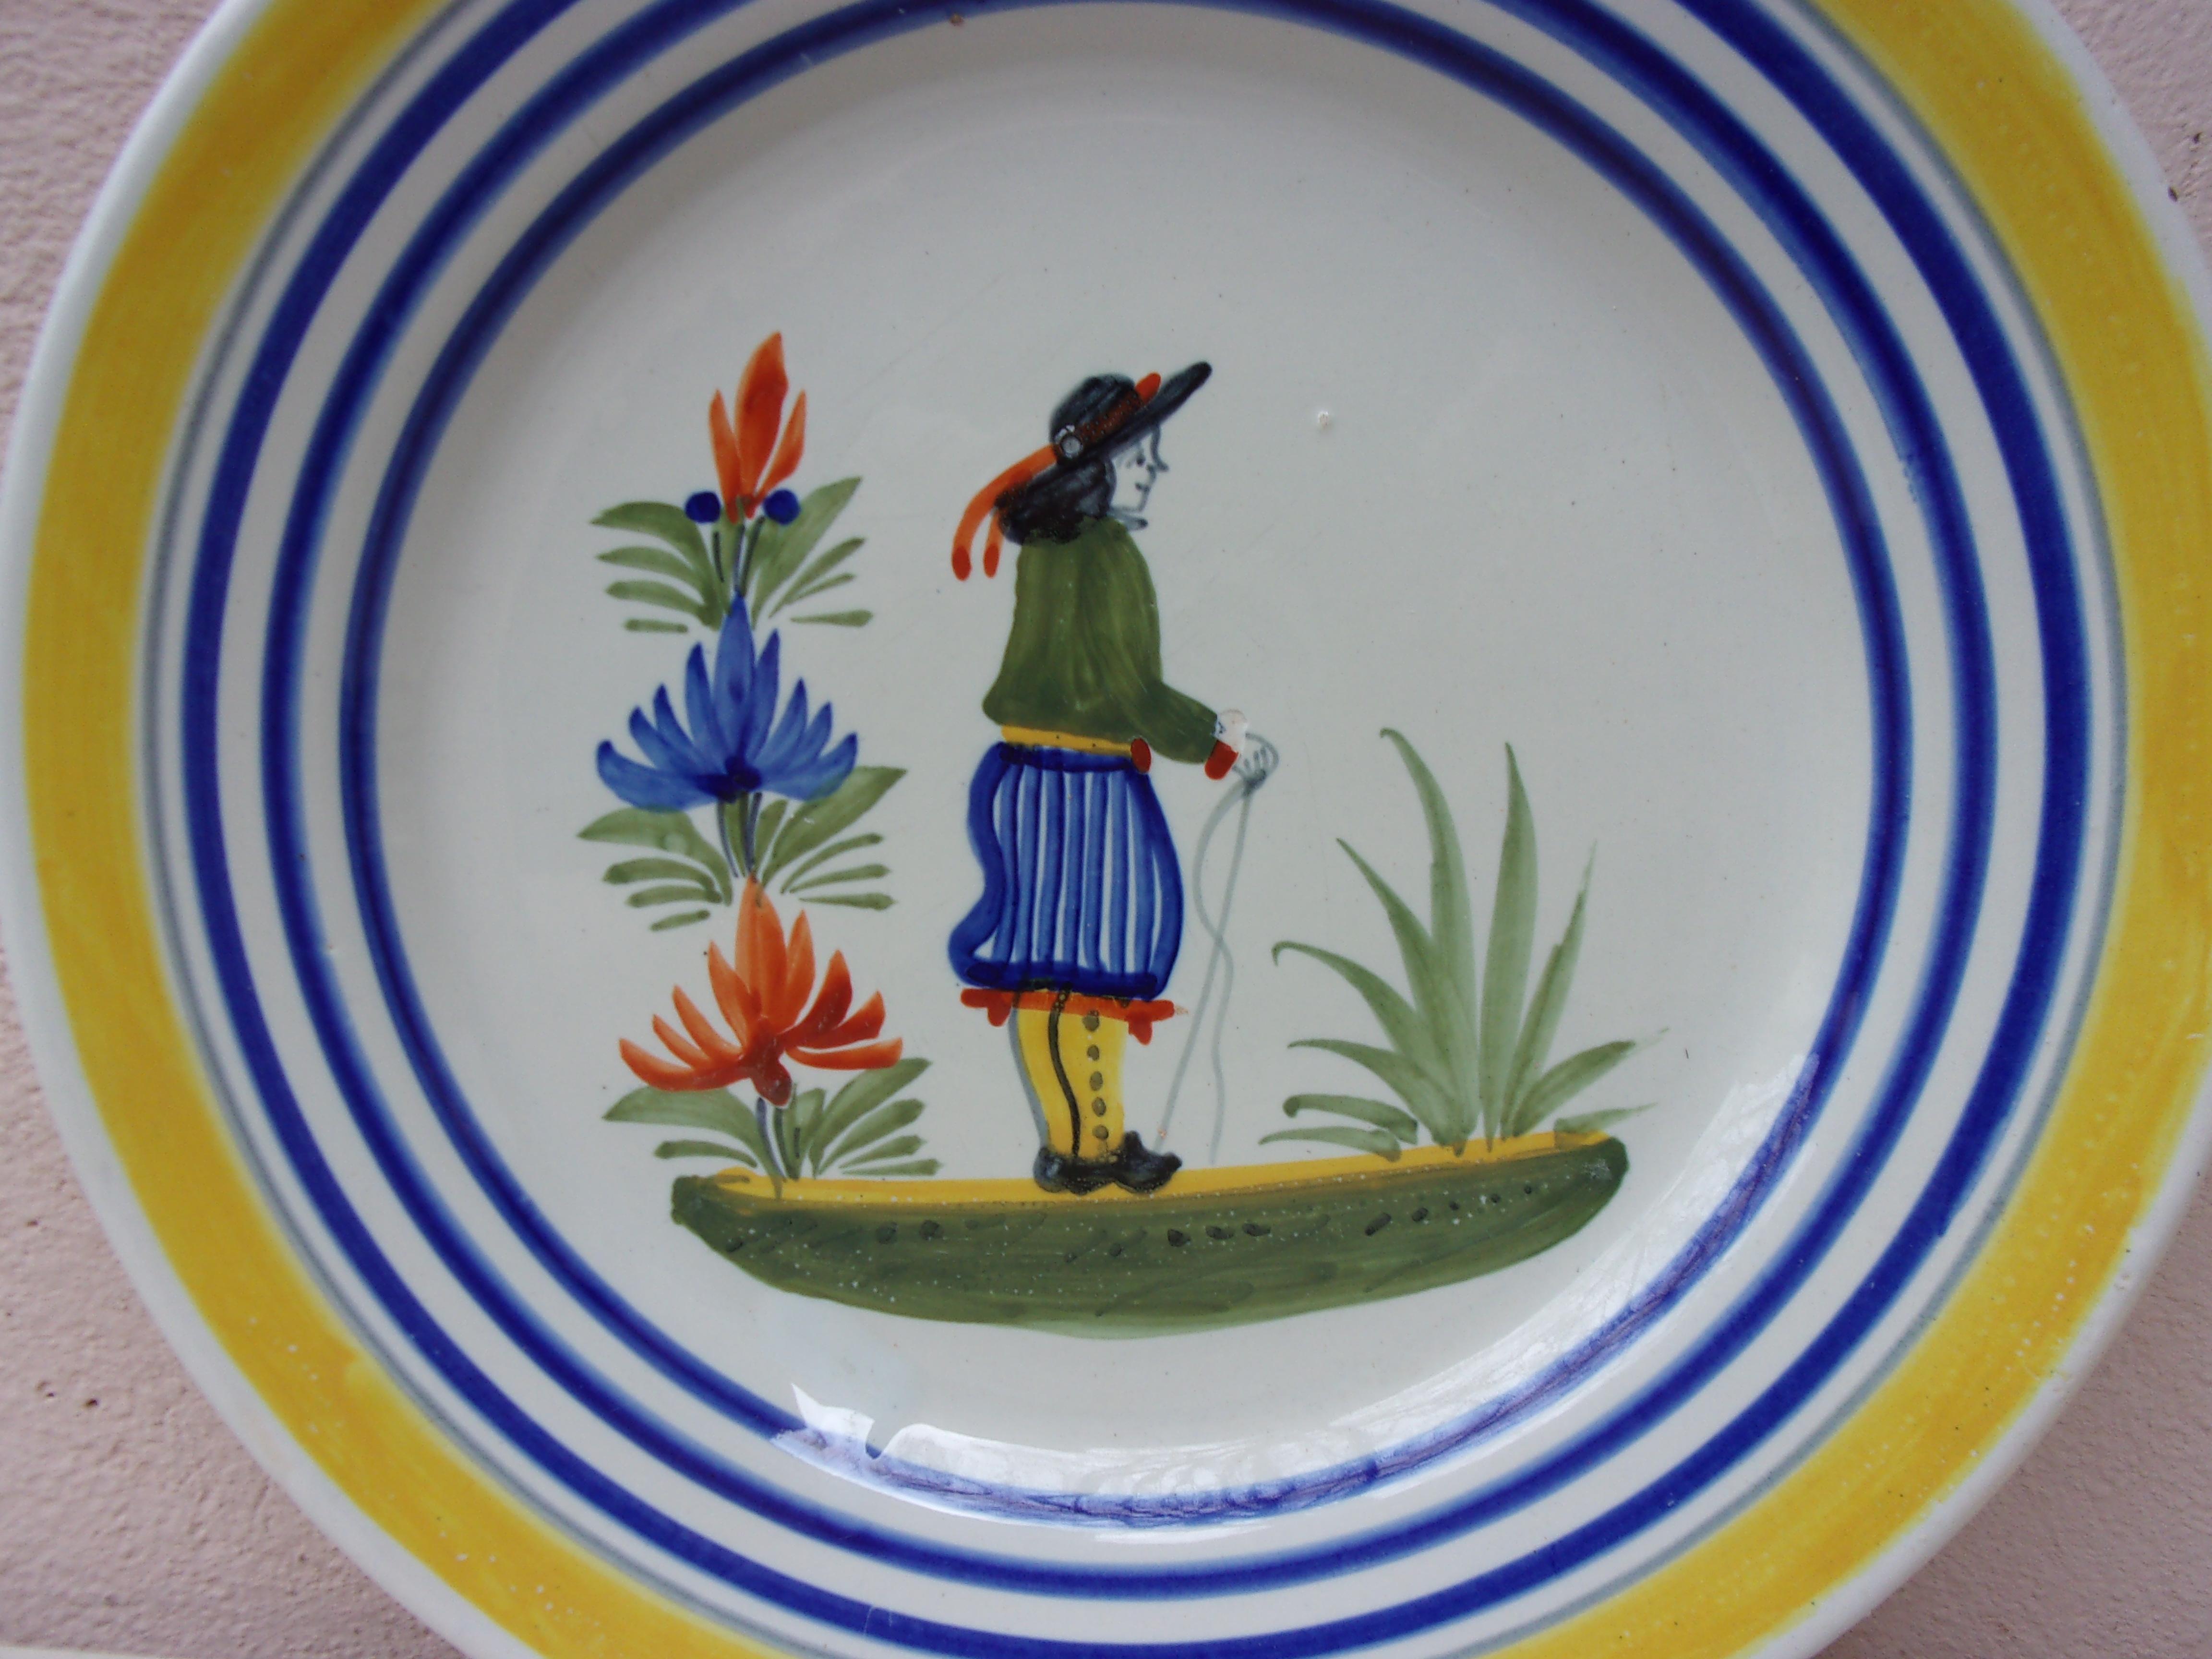 A French faience plate with a farmer in the costume with flowers signed Henriot Quimper, circa 1950.
Colorful yellow border and blue lines.
 